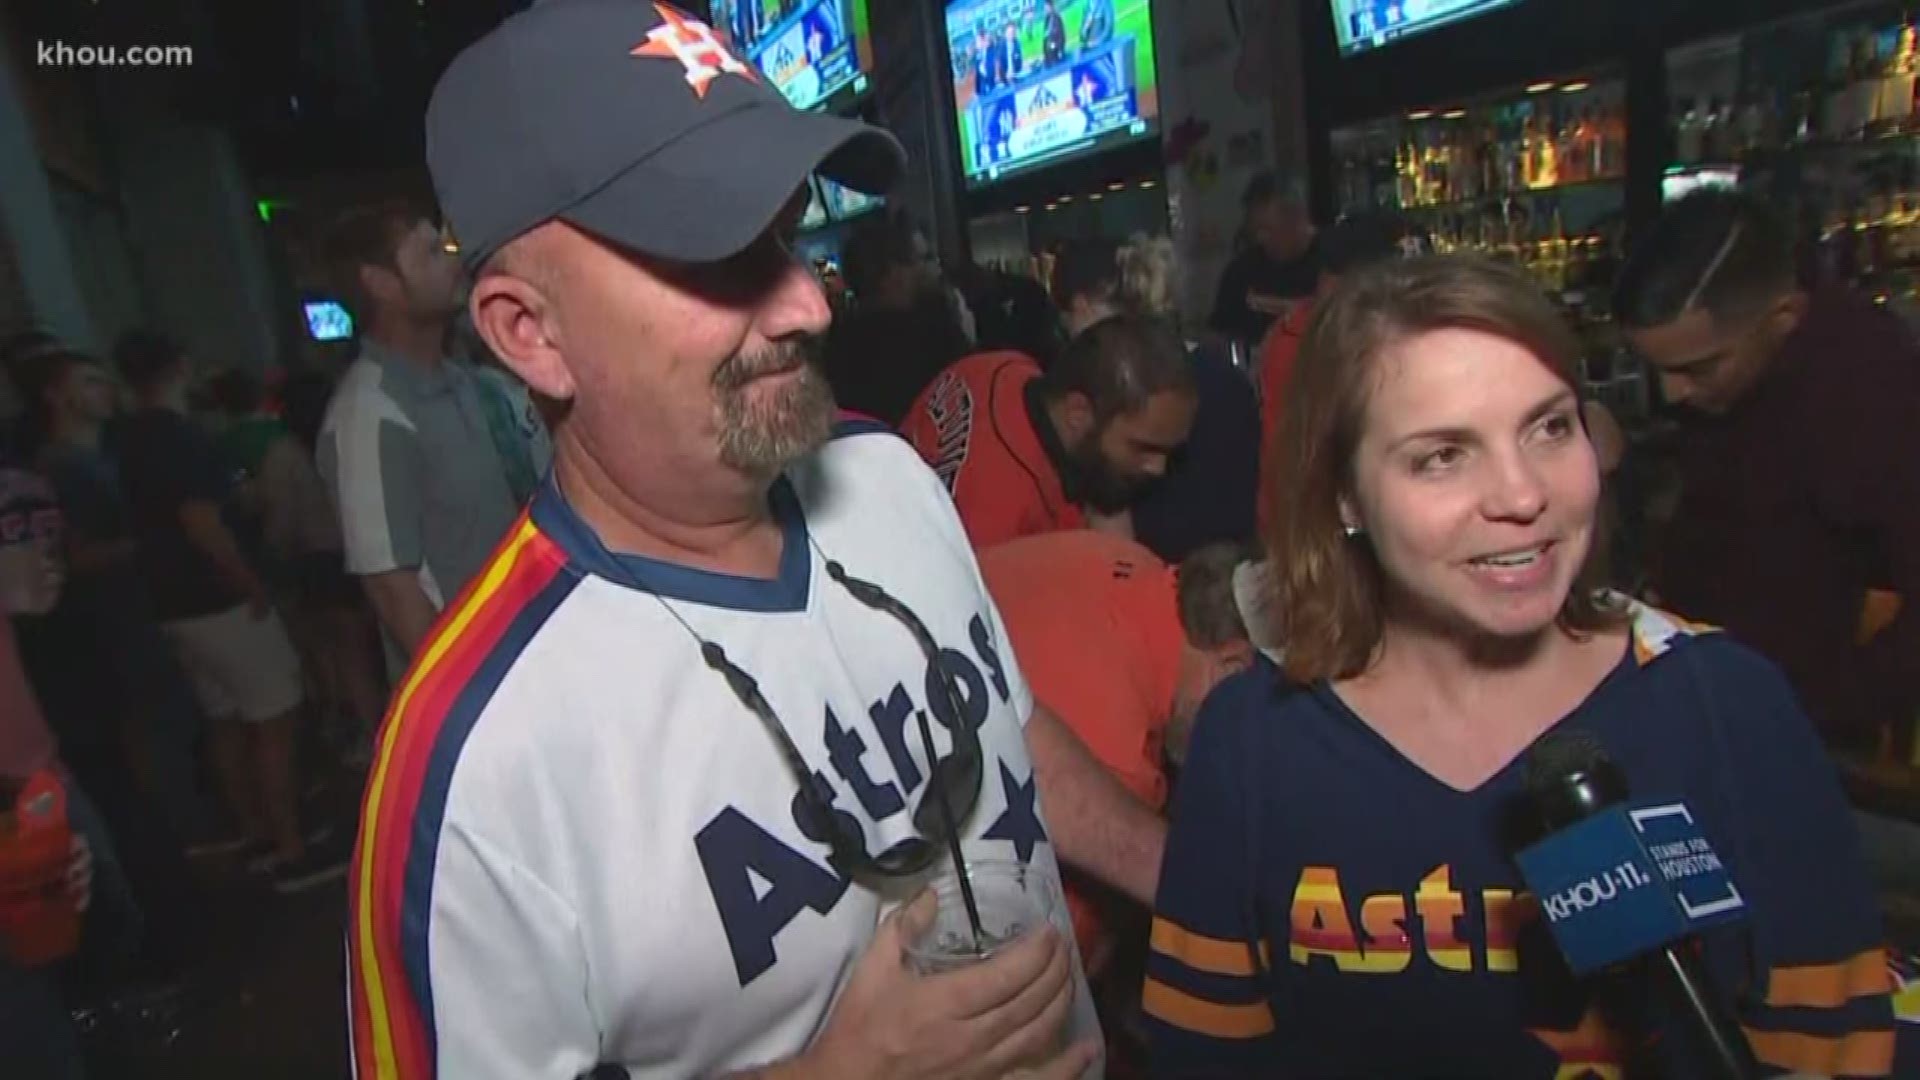 Janelle Bludau was talking to fans about the Astros big win over New York.  Houston heads back to the World Series for the second time in three years!